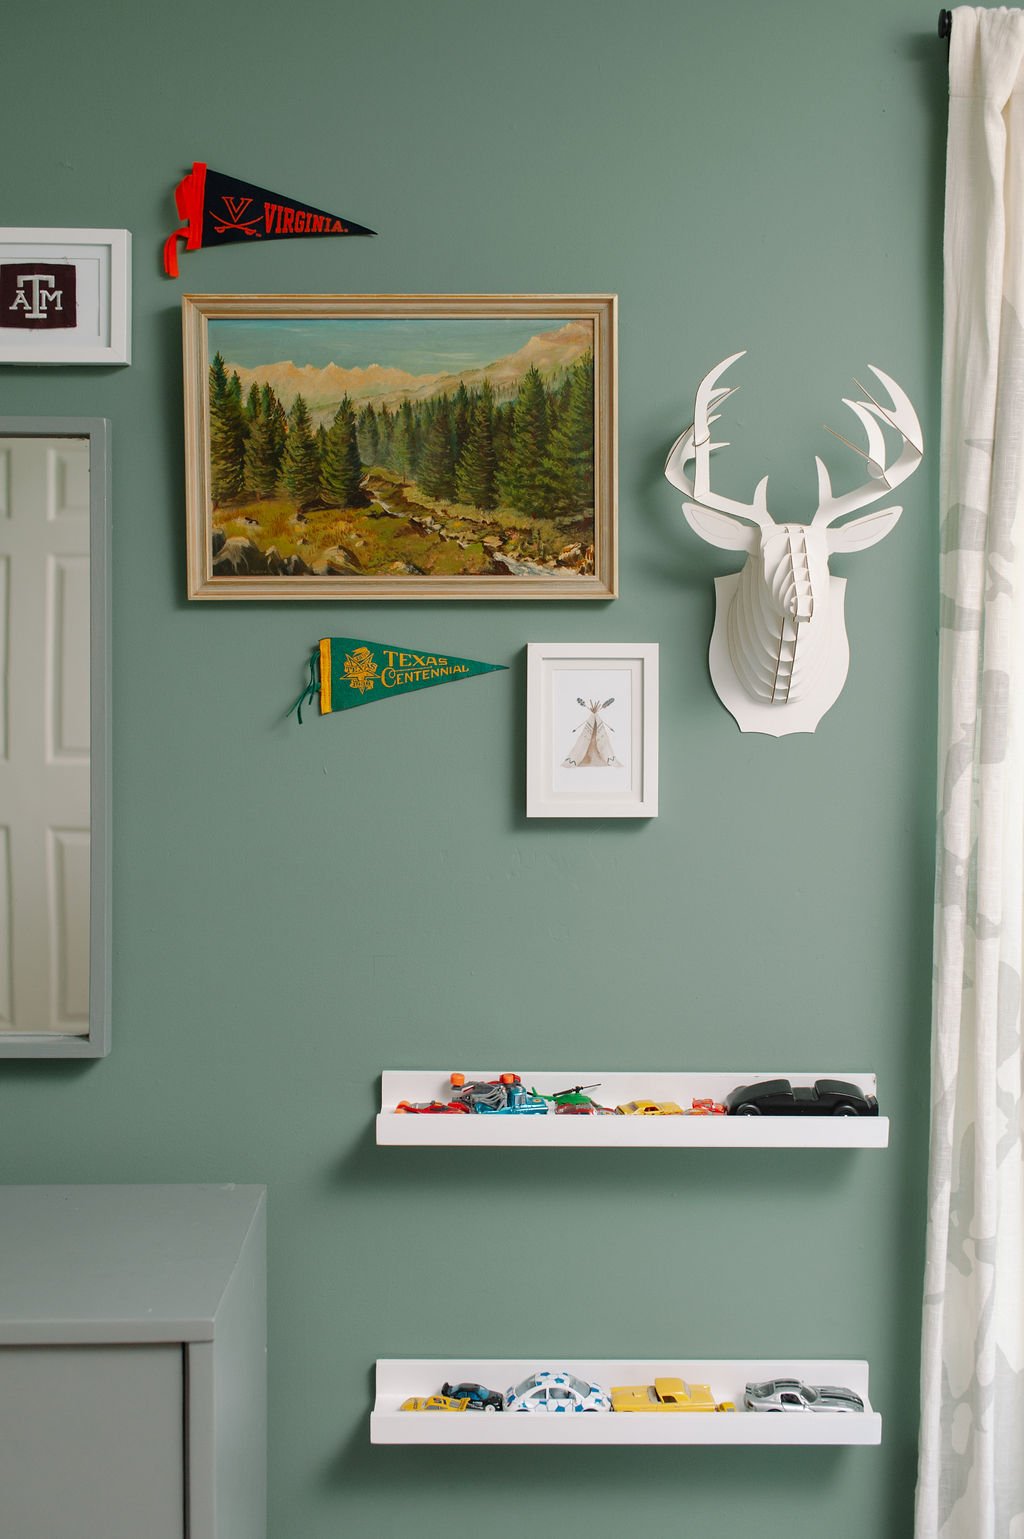 Boys room gallery wall with vintage art and penants